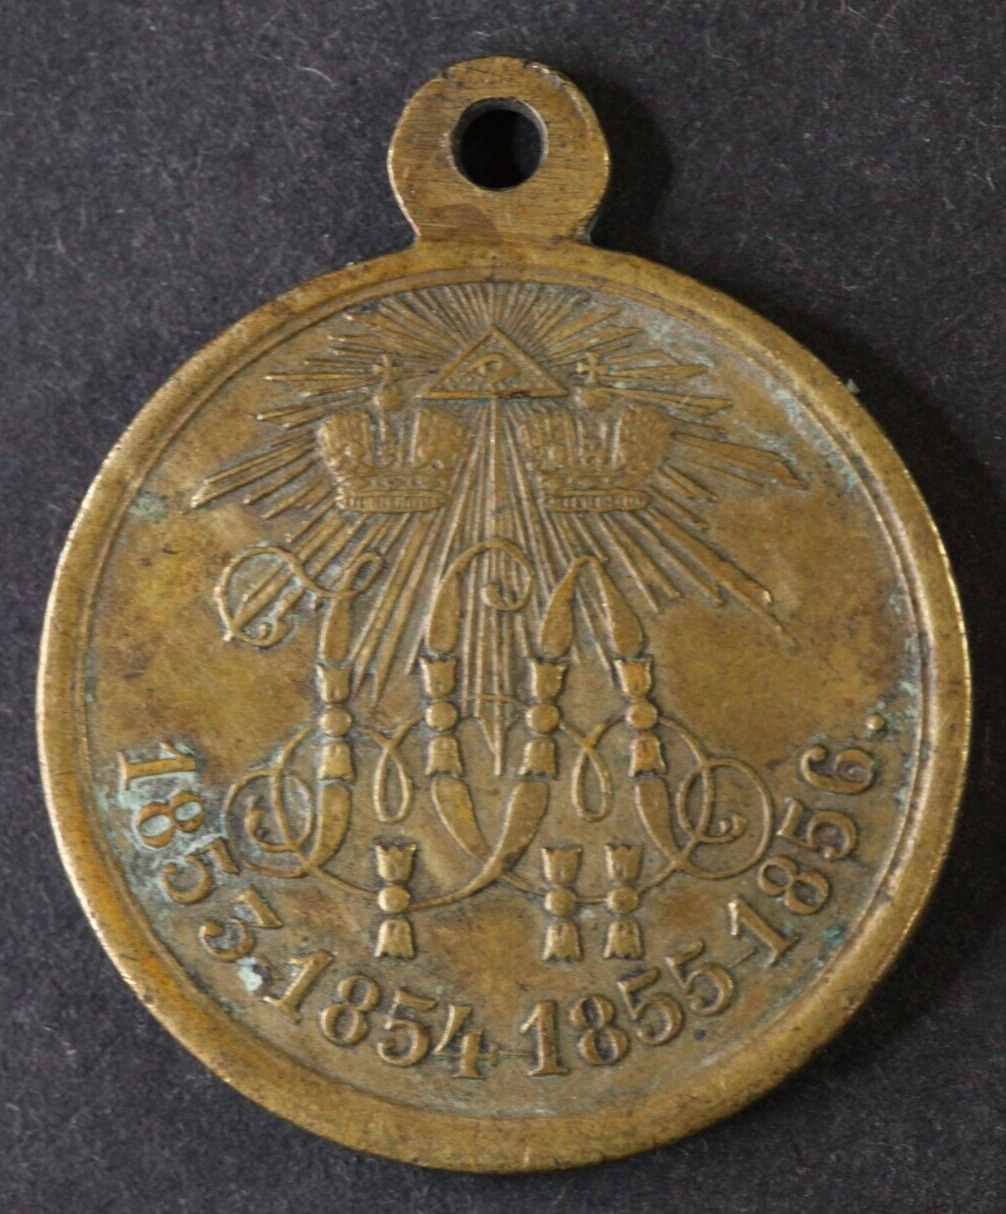 ORIG. Russian Empire Medal In commemoration of the Crimea War 1853-1856 #1653